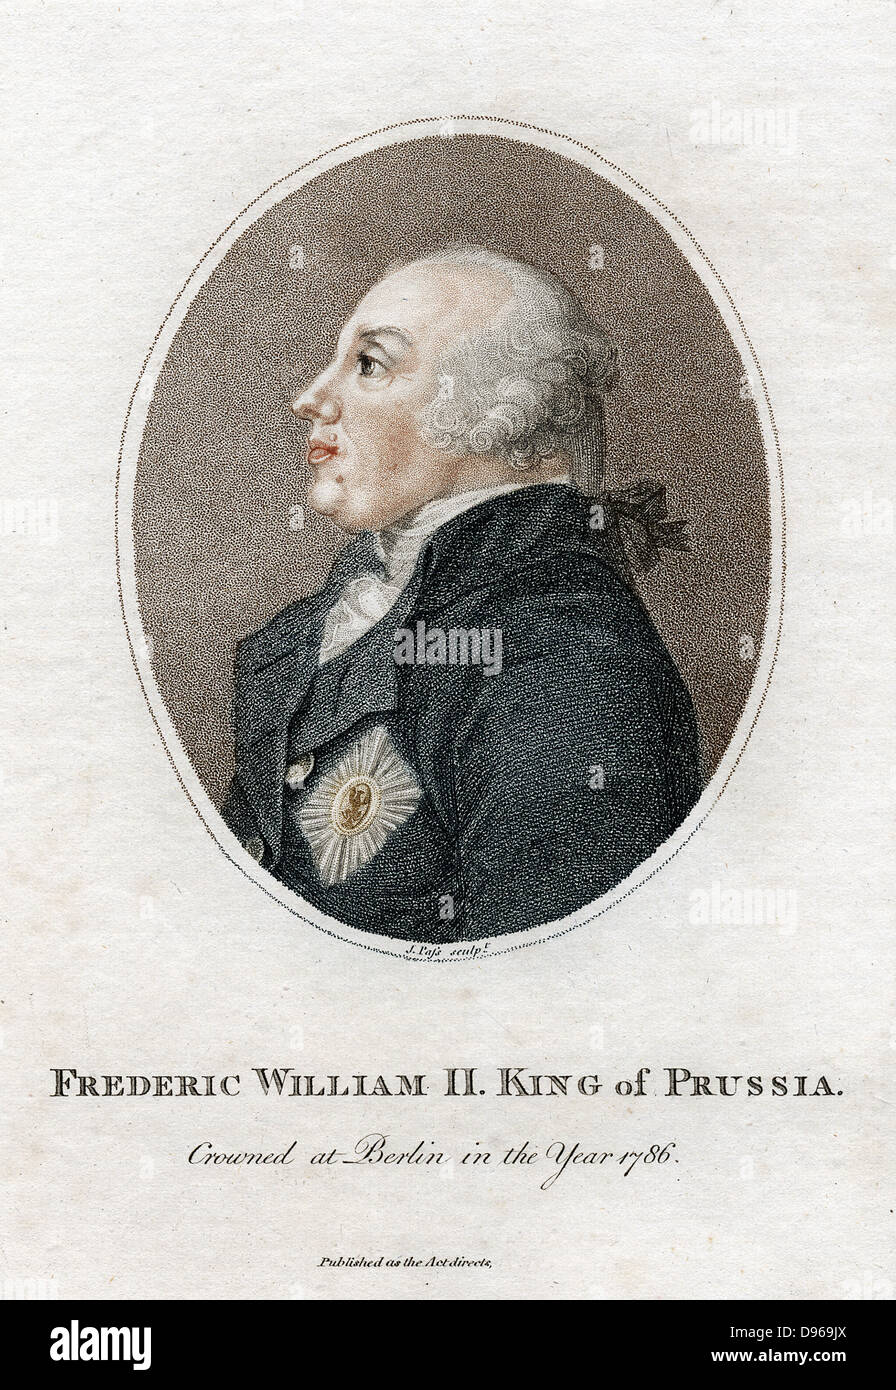 Frederick William II (1744-1797) King of Prussia from 1786. Nephew of Frederick II, the Great. Stipple engraving c1810. Stock Photo